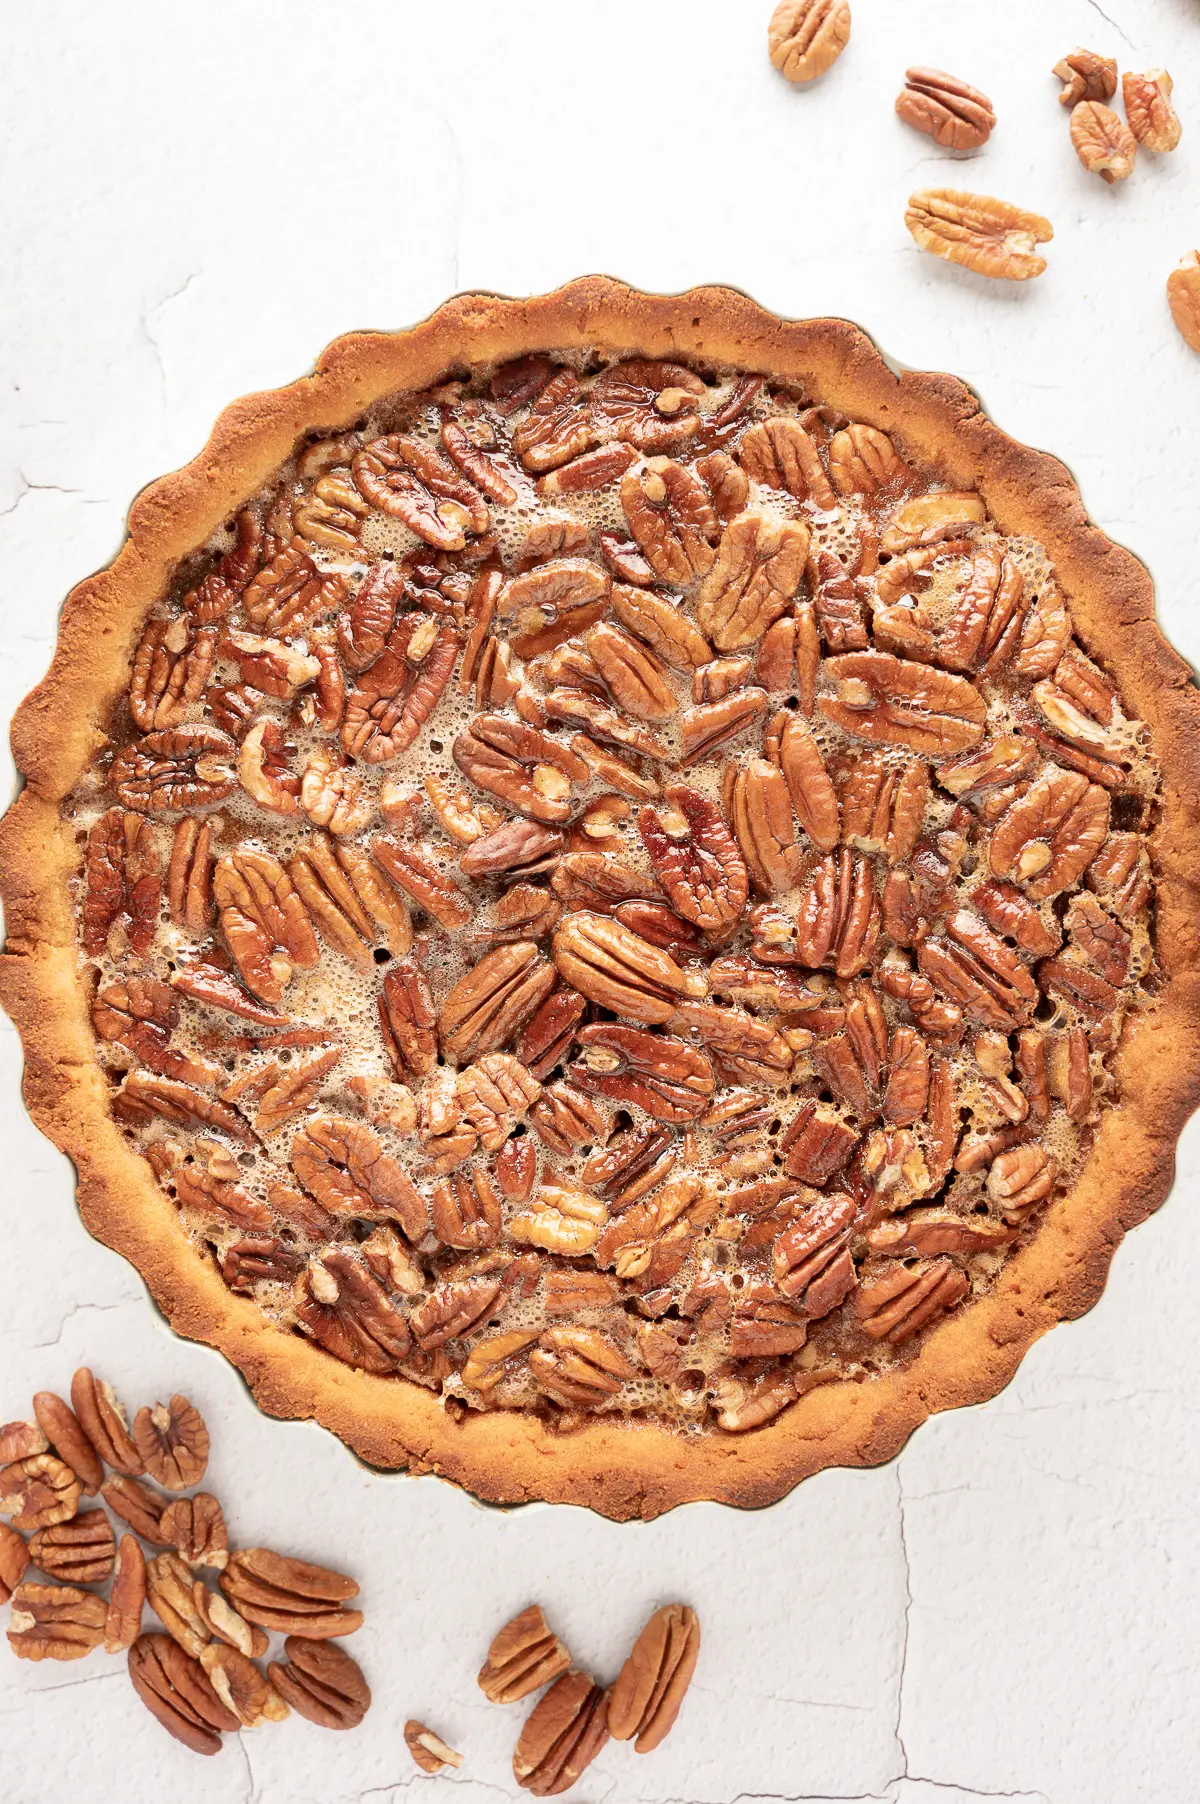 sugar-free pecan pie on a bright white back ground with scattered raw pecans. 